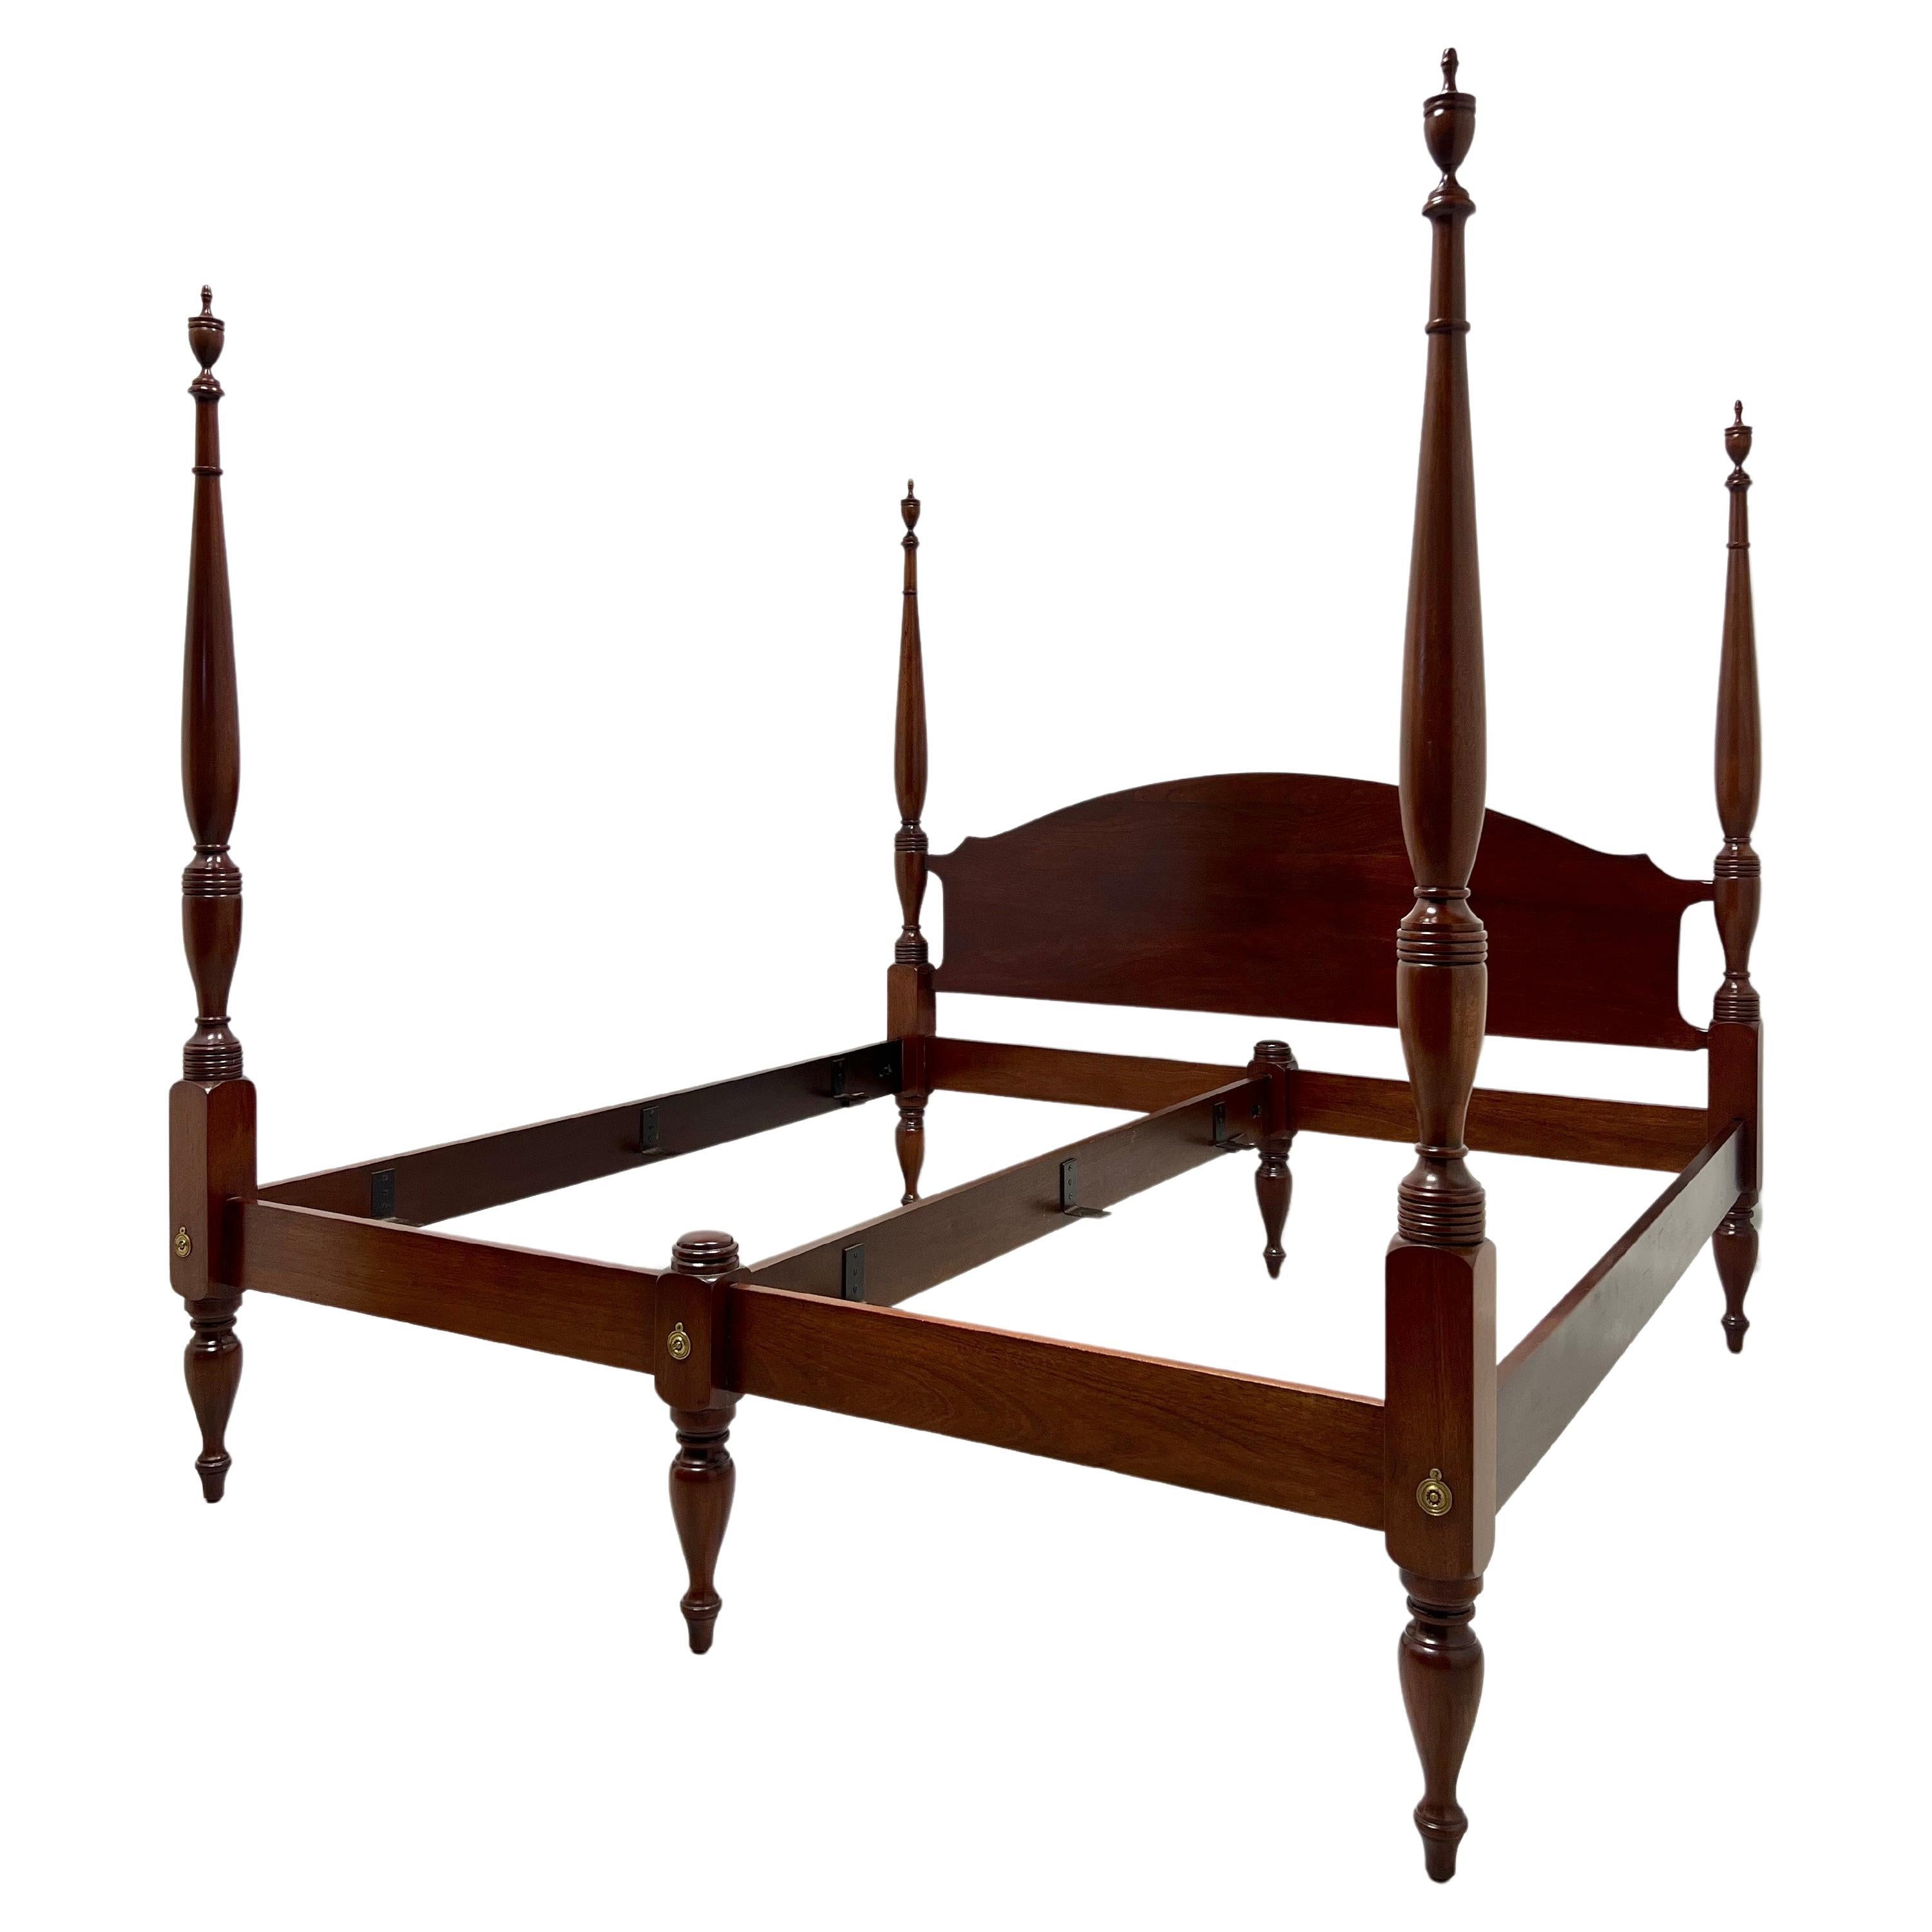 CRAFTIQUE Ashlawn Solid Mahogany Traditional King Size Four Poster Bed For Sale